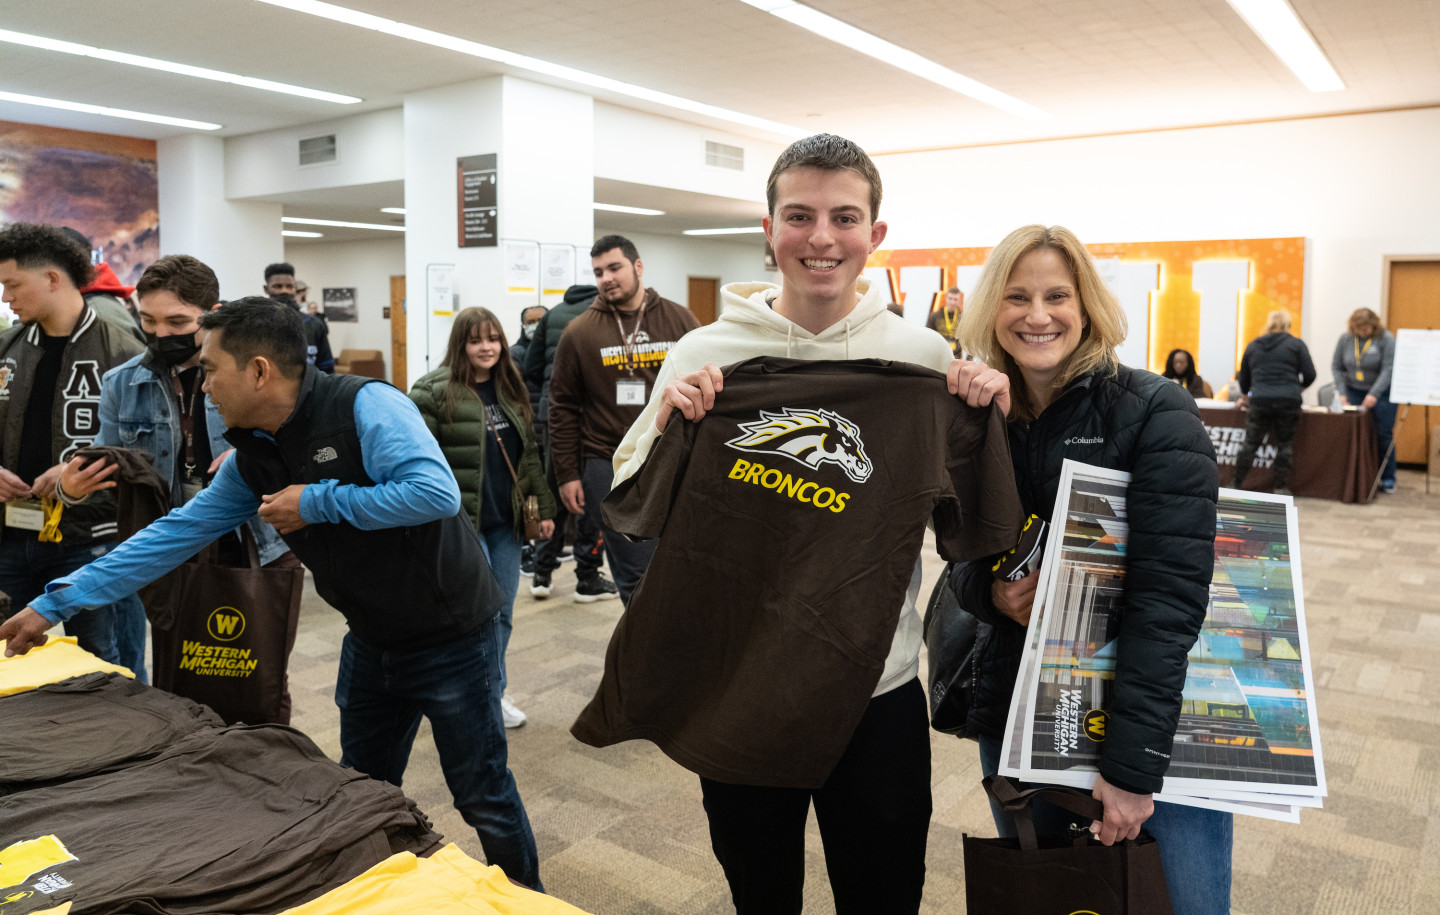 A student holds up a t-shirt.